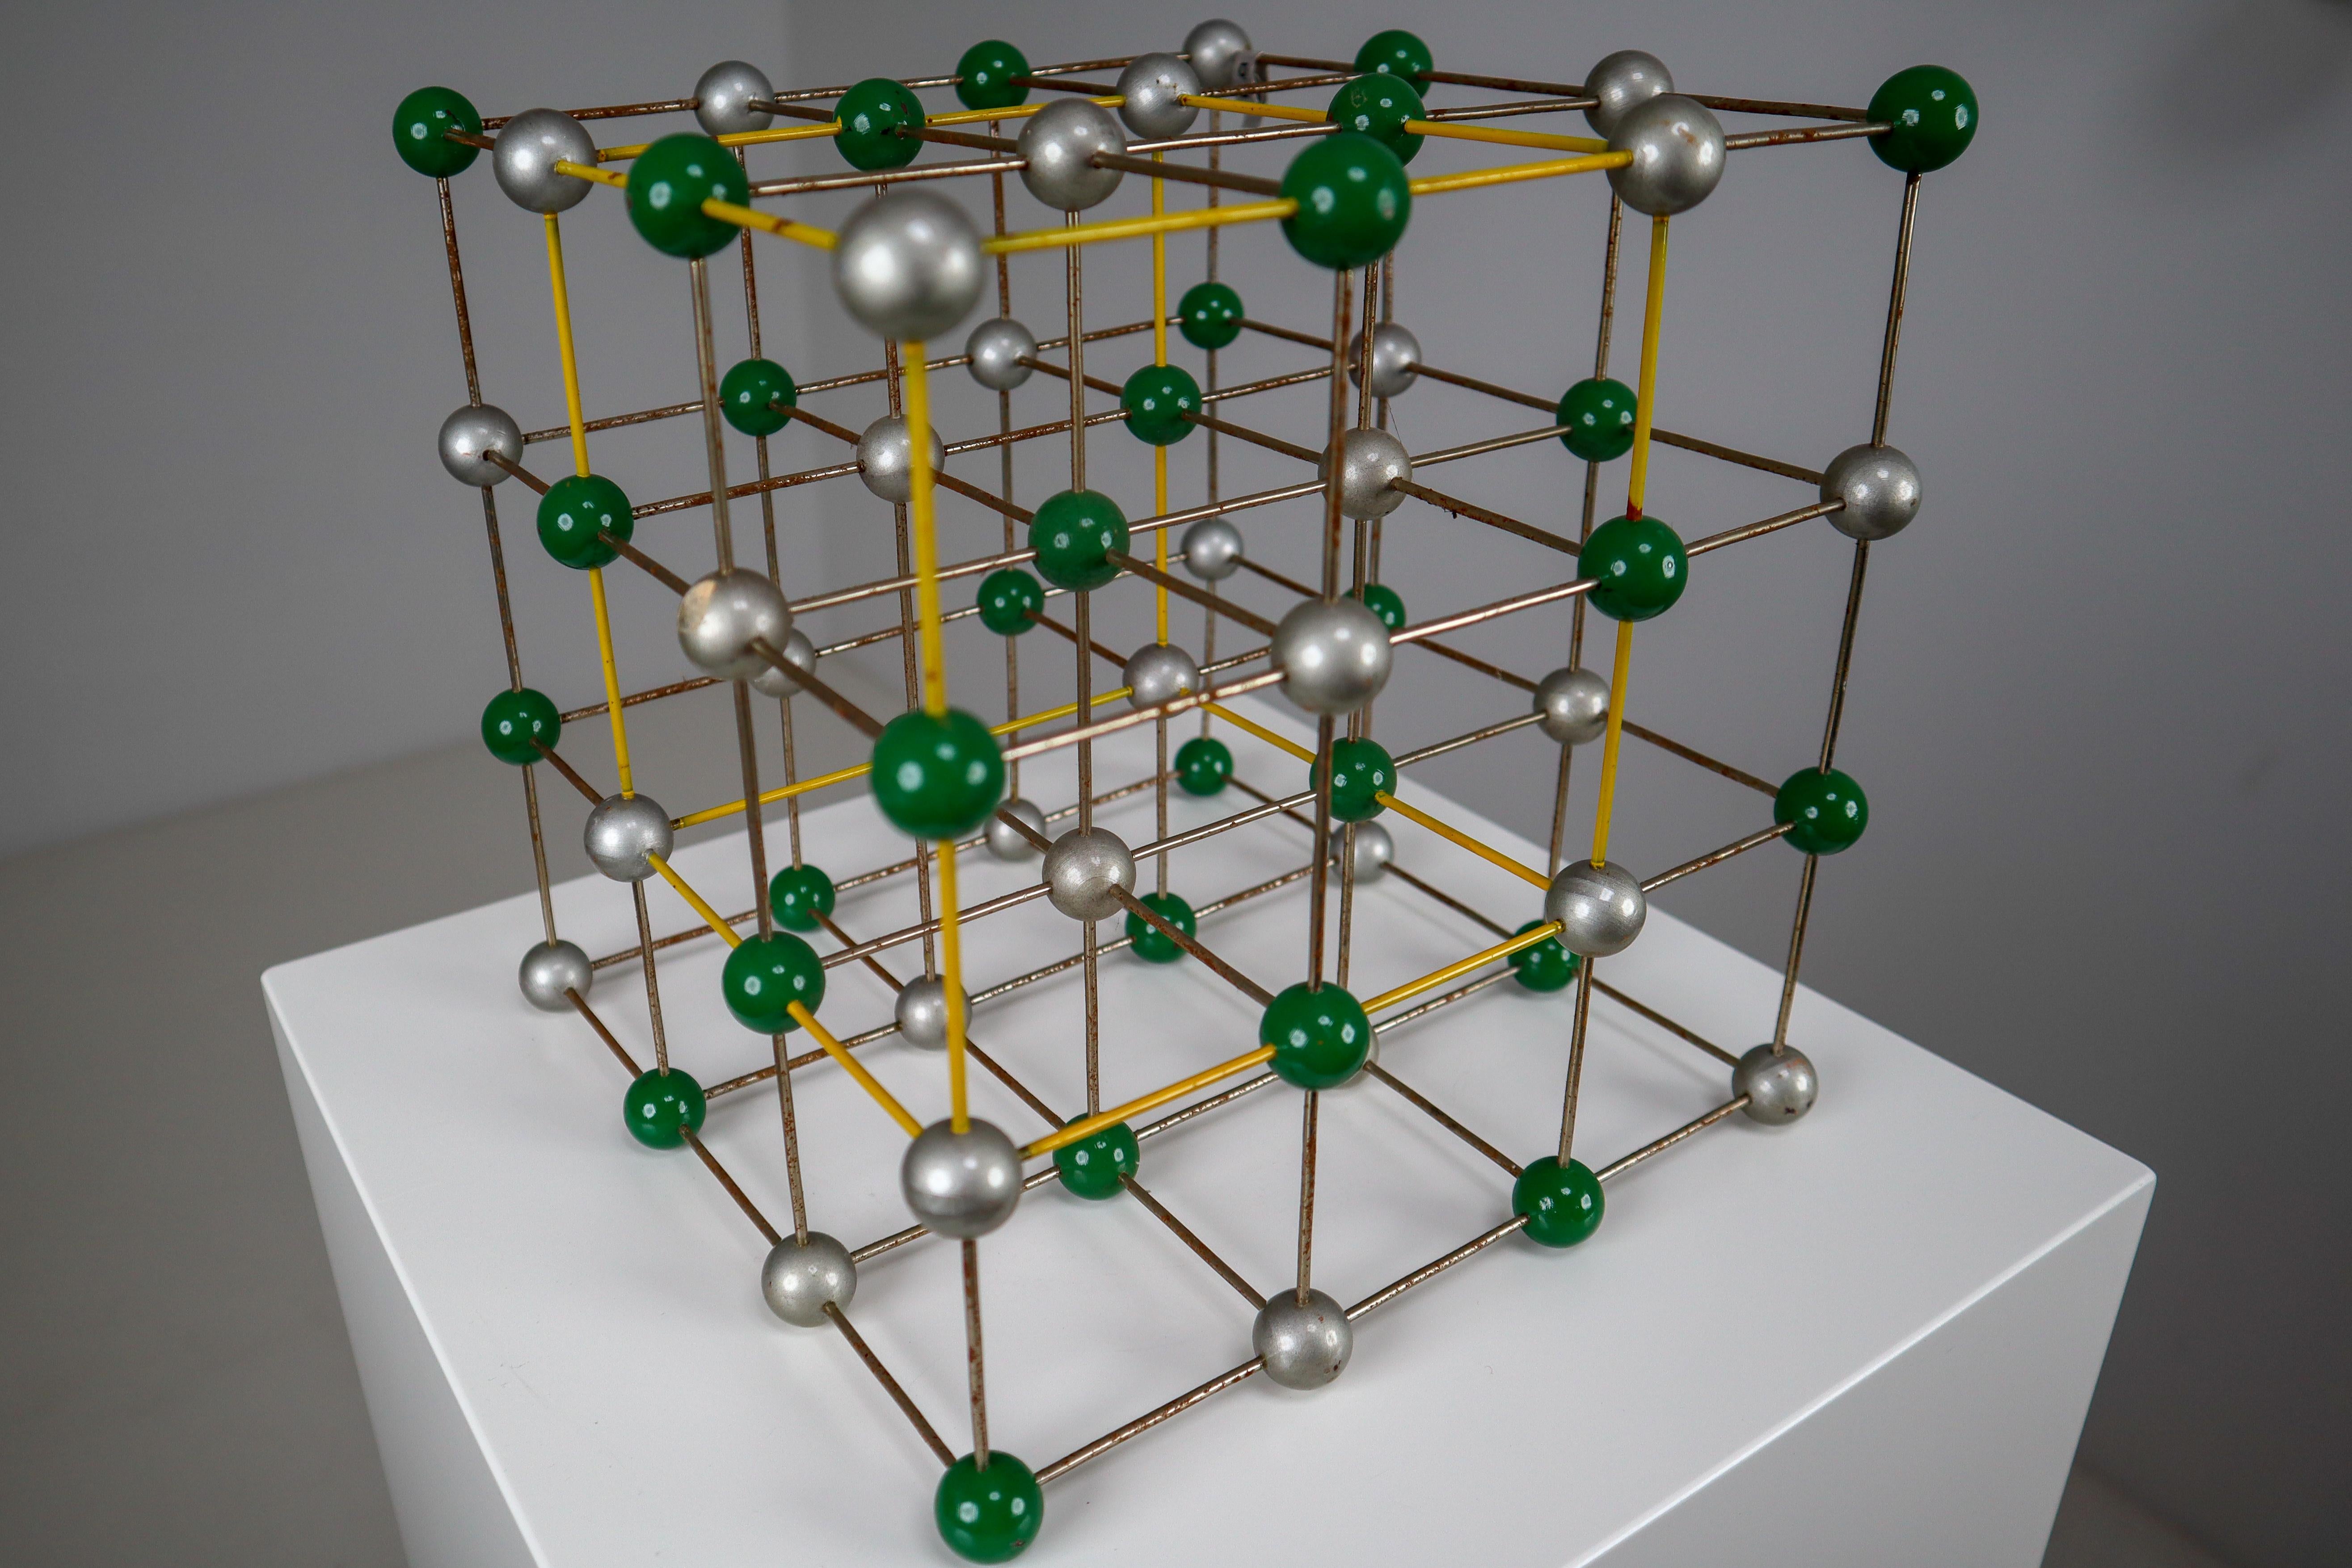 This beautiful patinated metal 1950s molecular structure will display great on any table for presentation. It measures very nicely at 9.75 x 9.75 x 9.75. The piece was used for study in a school in Prague back in the early or late 1950s. It still